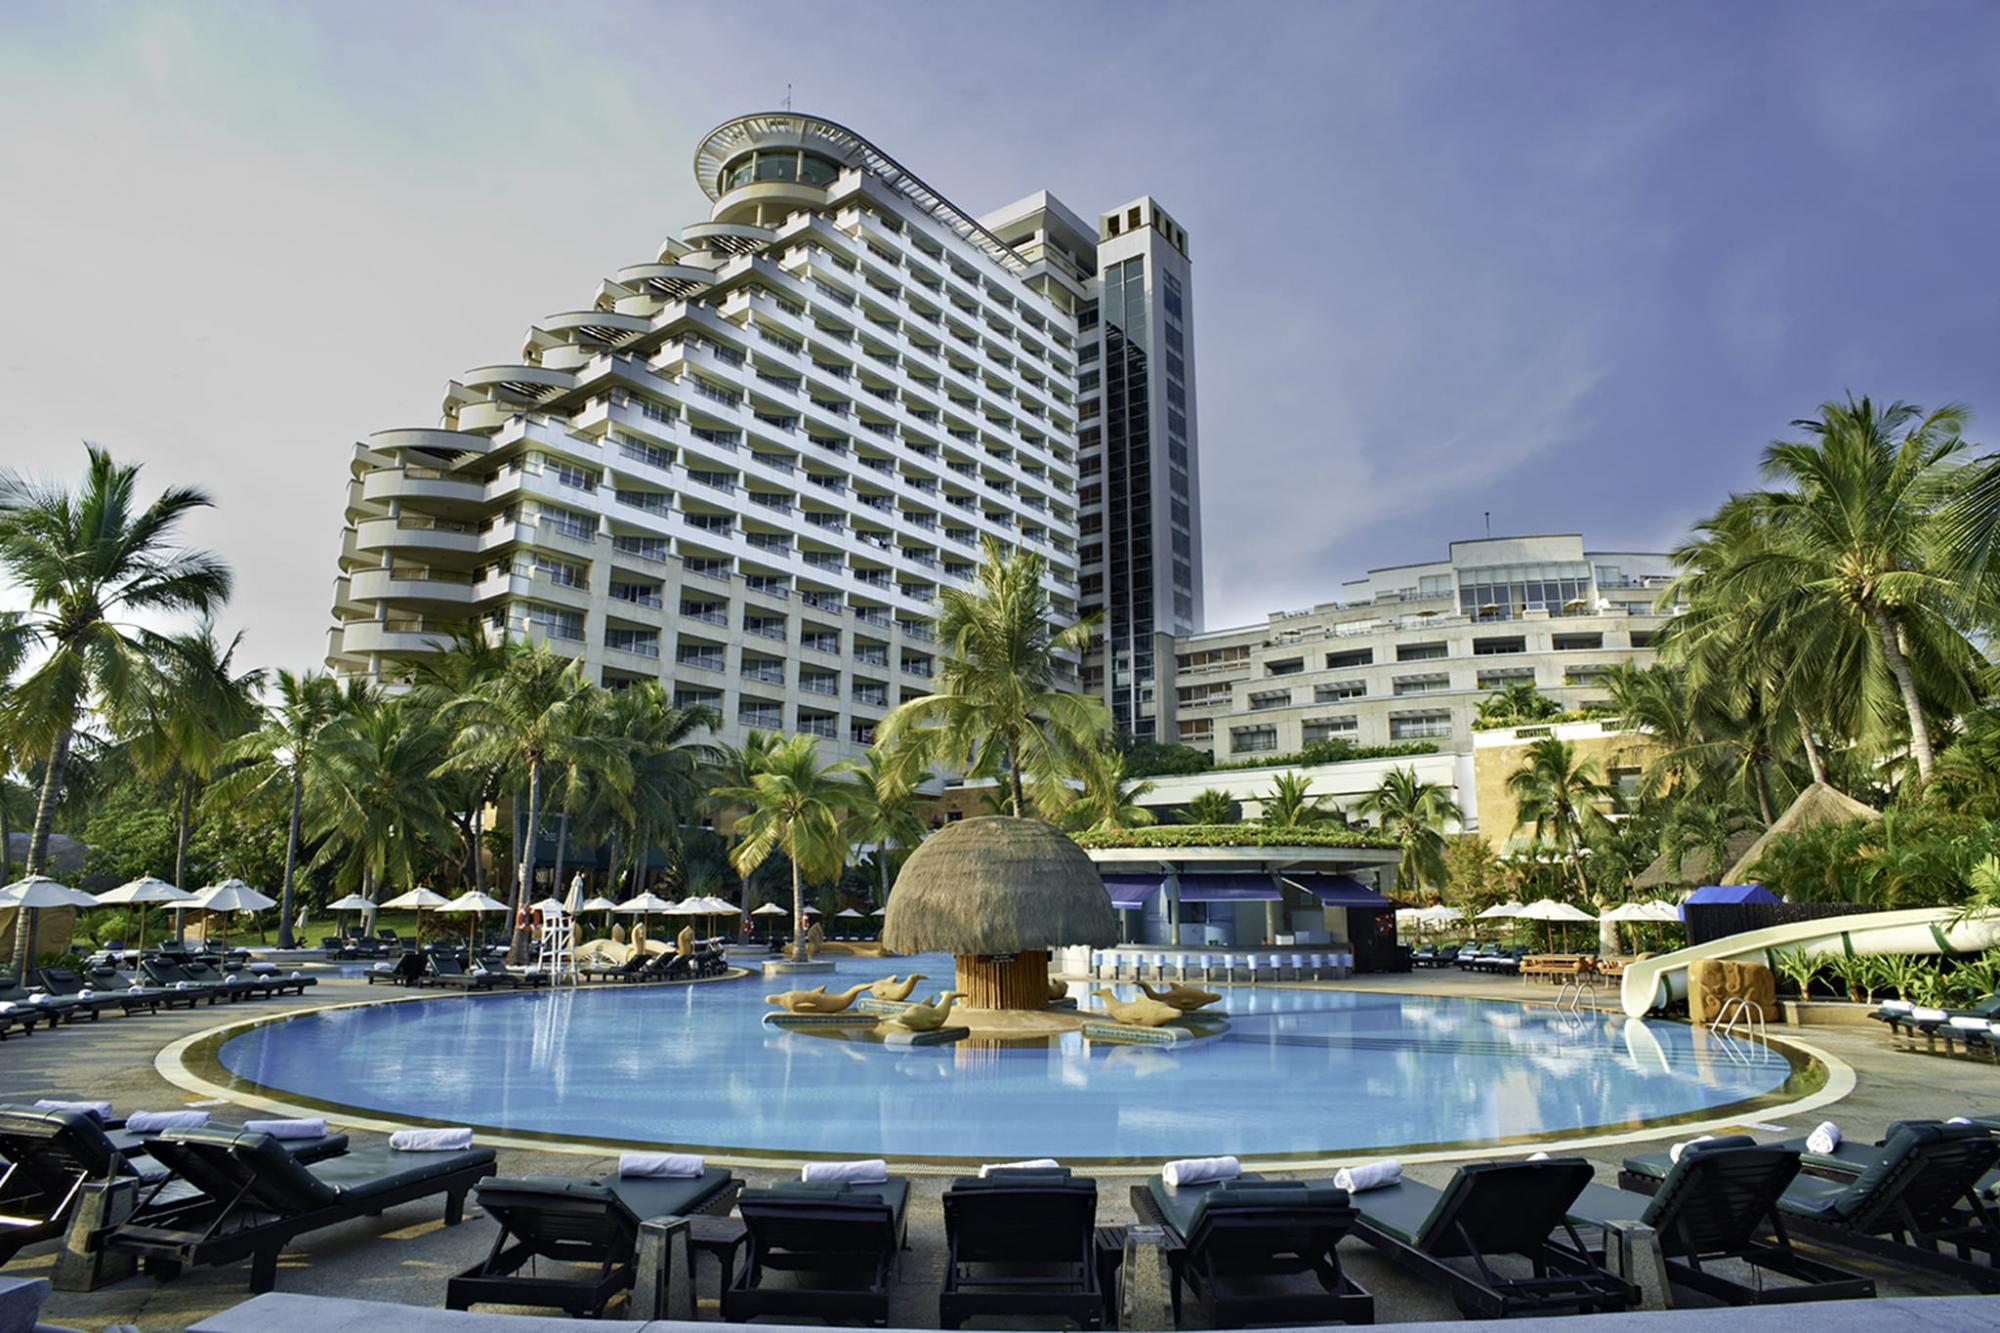 The Hilton Hua Hin Resort and Spa's picturesque hotel situated in stunning Hua Hin.